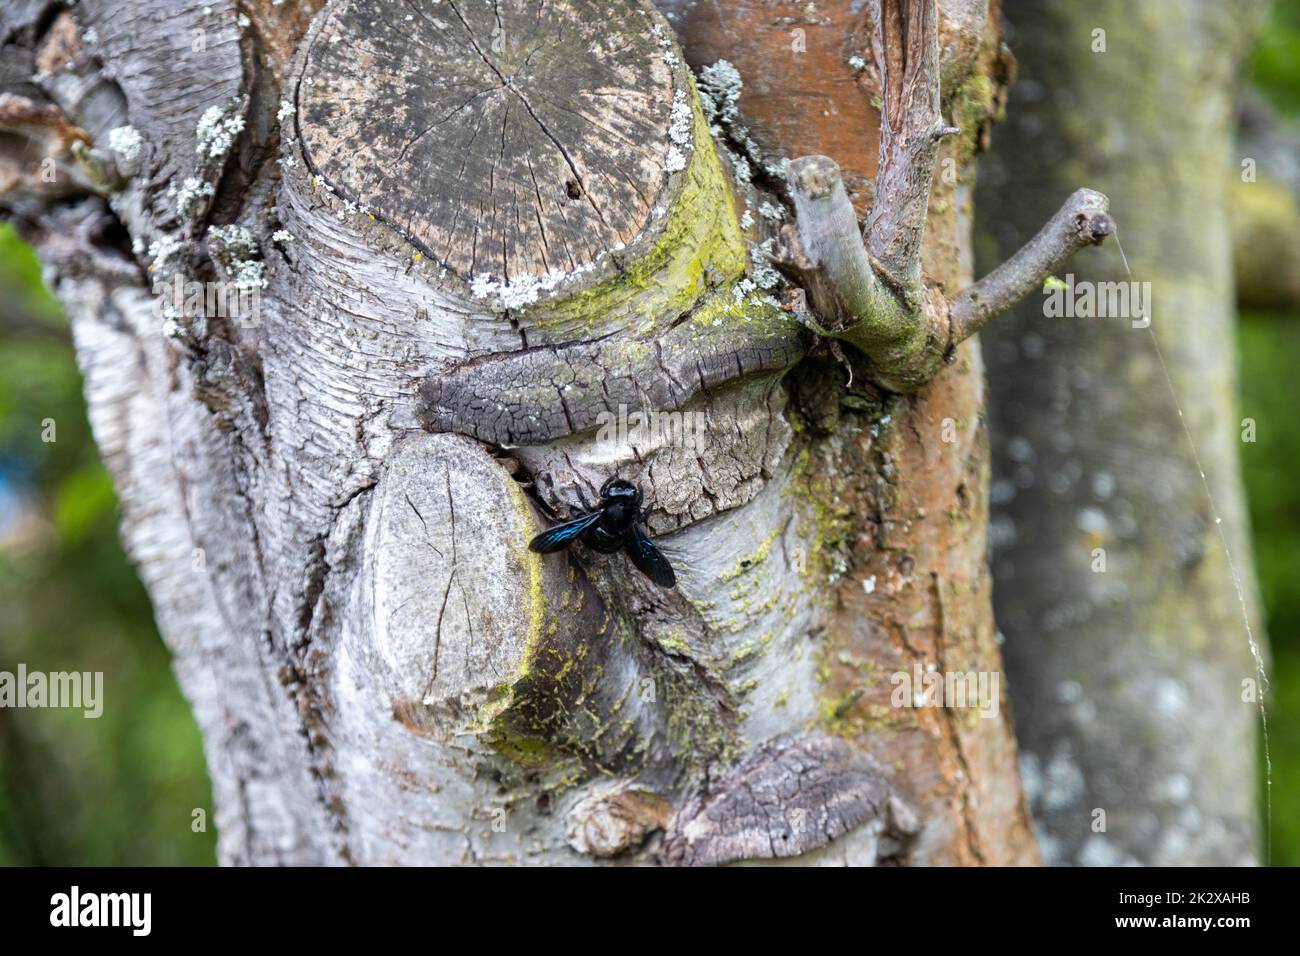 A blue wood bee works on the trunk of an old tree. Stock Photo